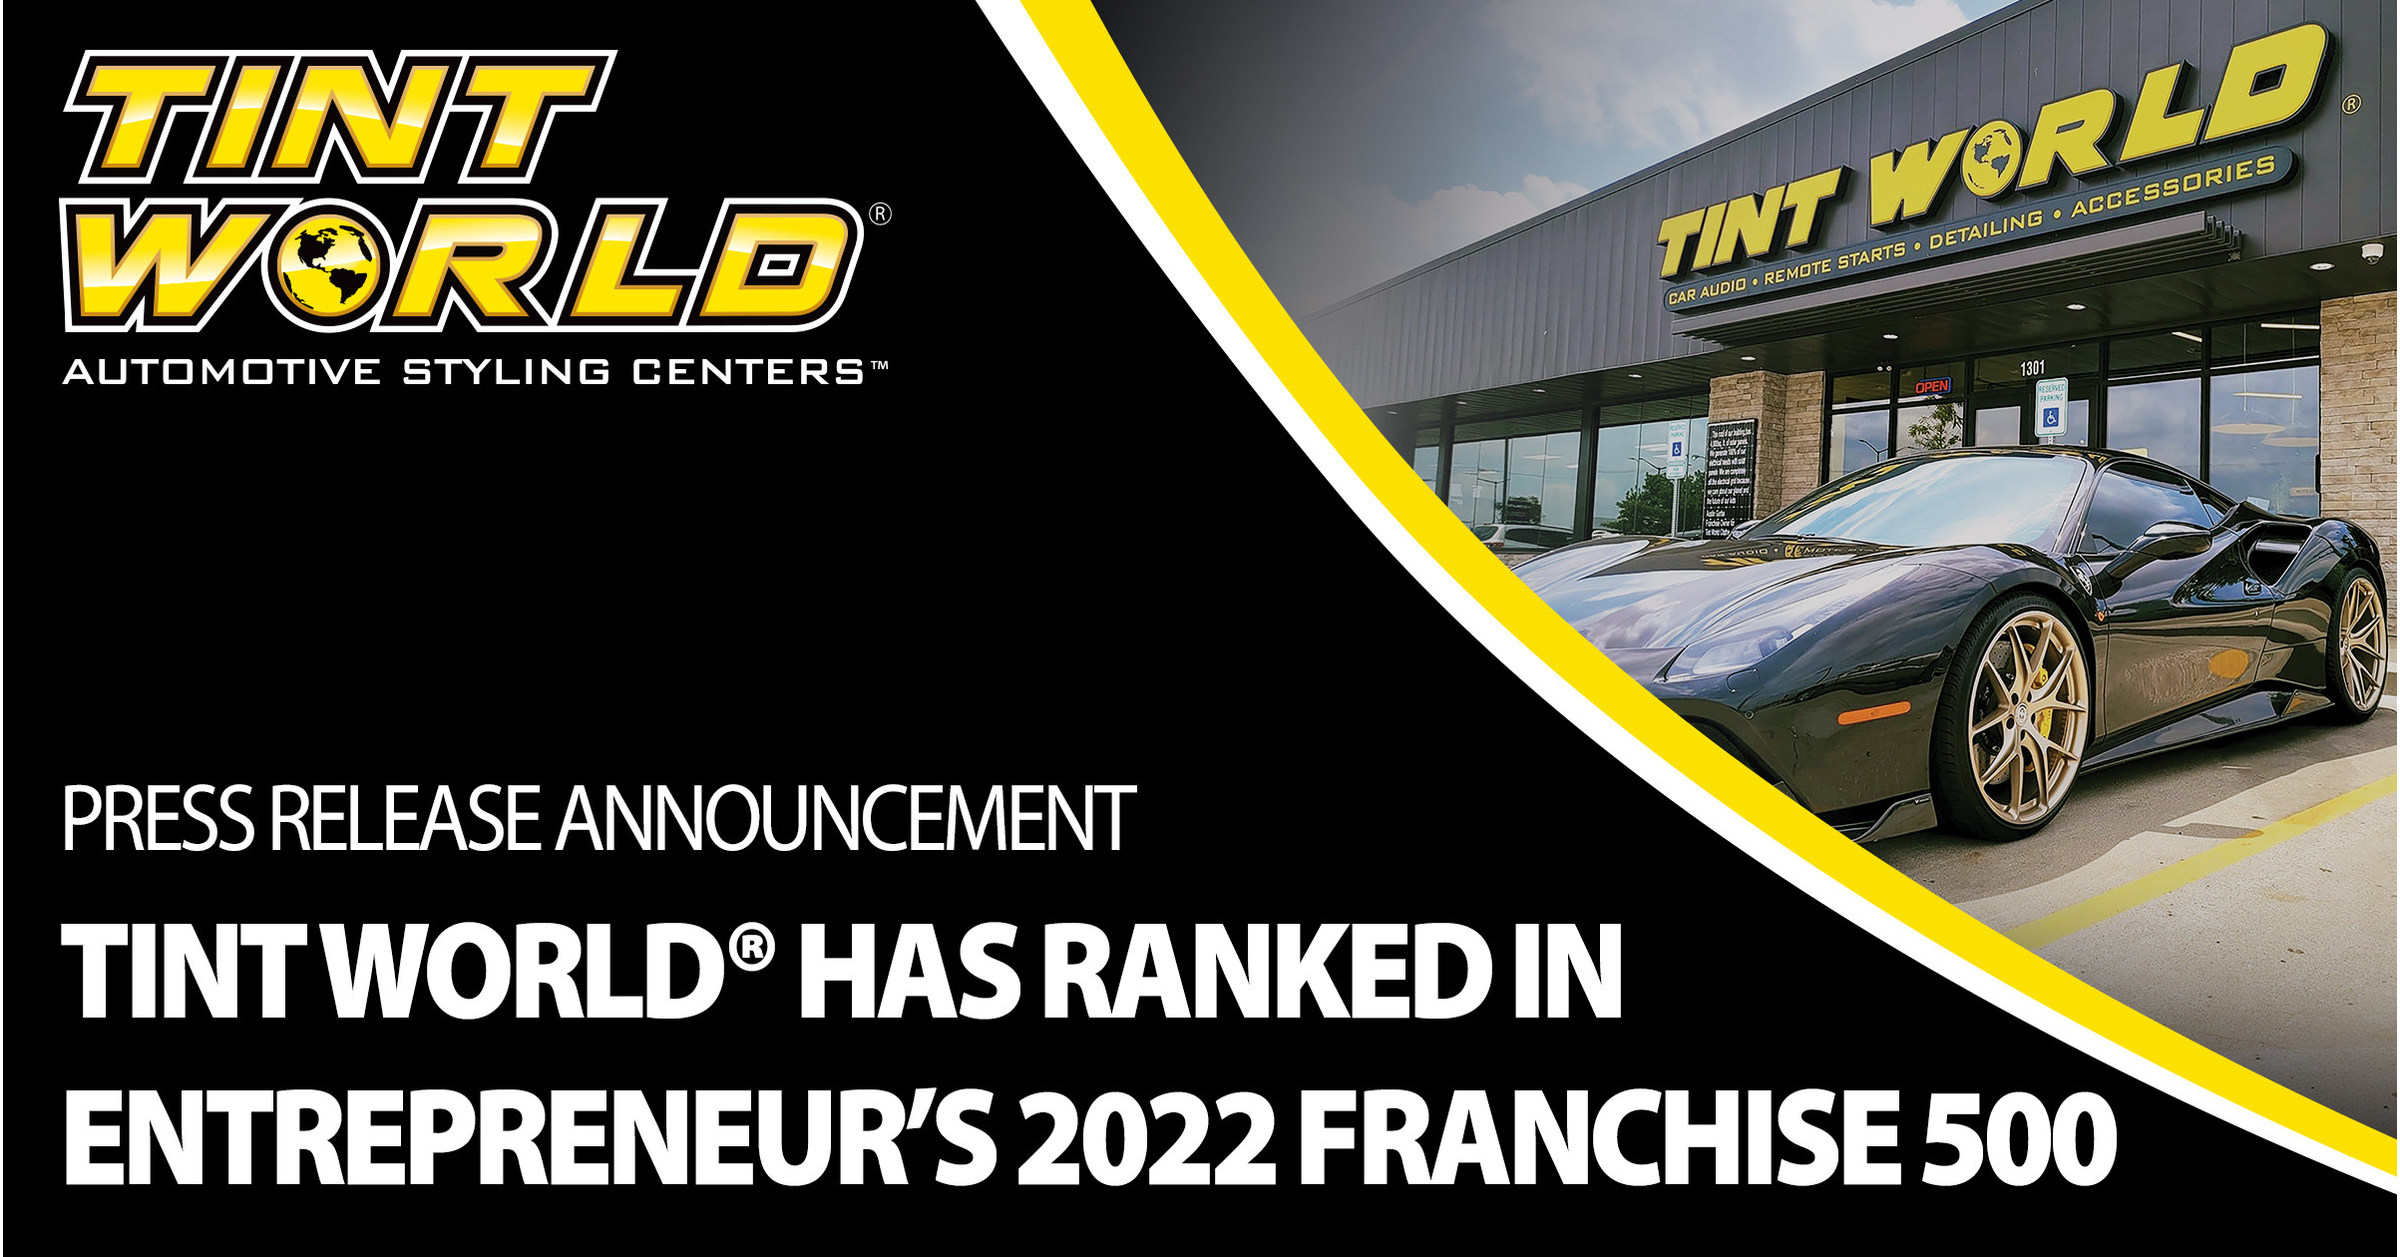 Tint World® ranked among top franchises in Entrepreneur's highly competitive Franchise 500®